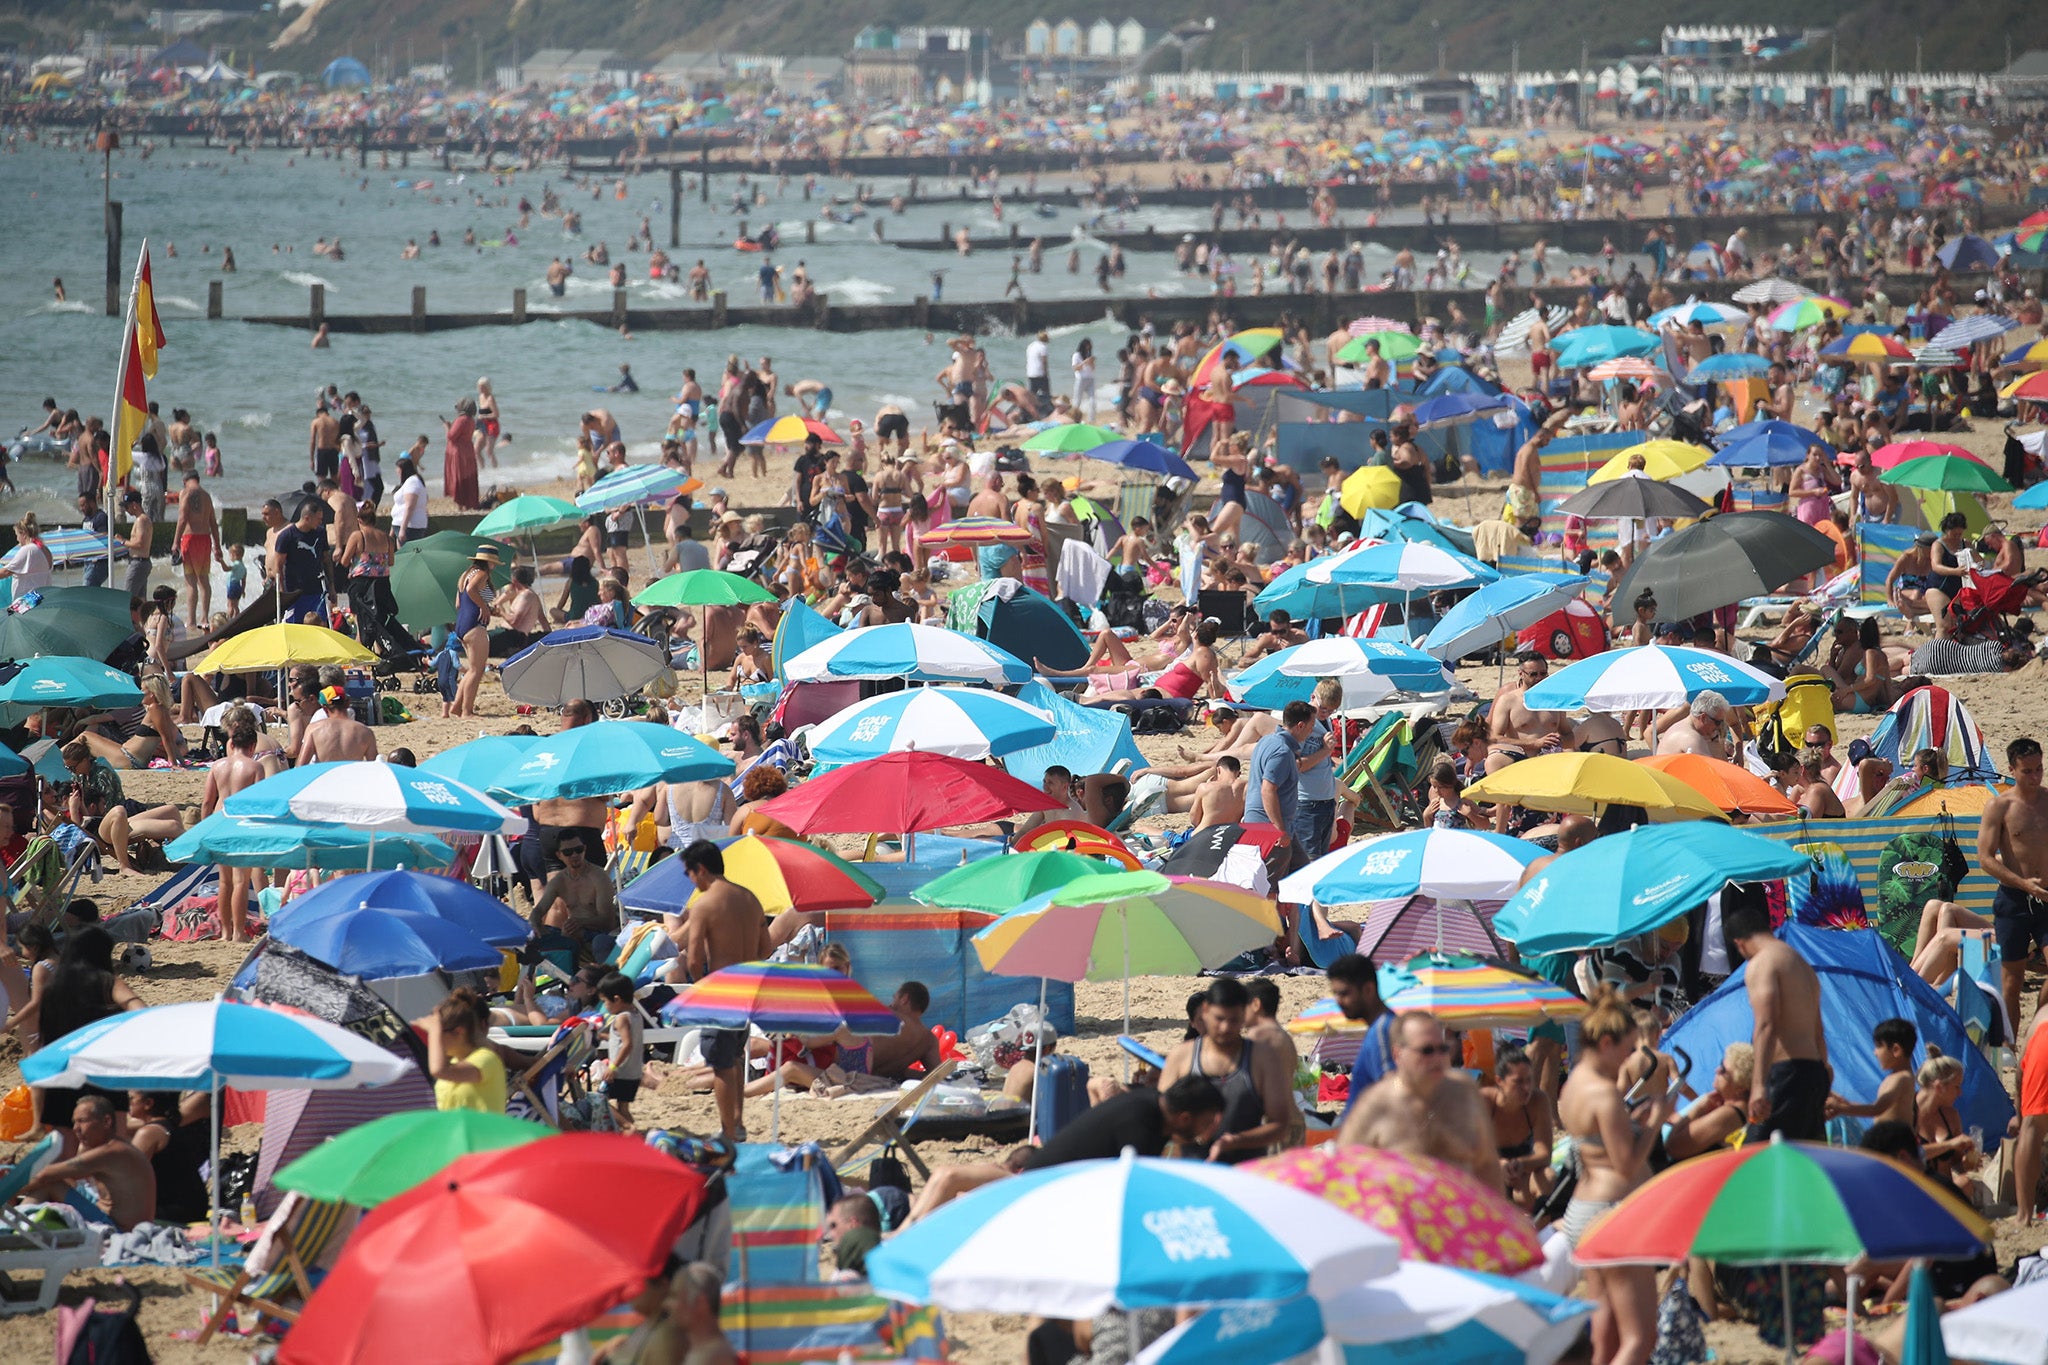 More than 3,000 'excess deaths' in England have been linked to heatwave conditions over the past four summers